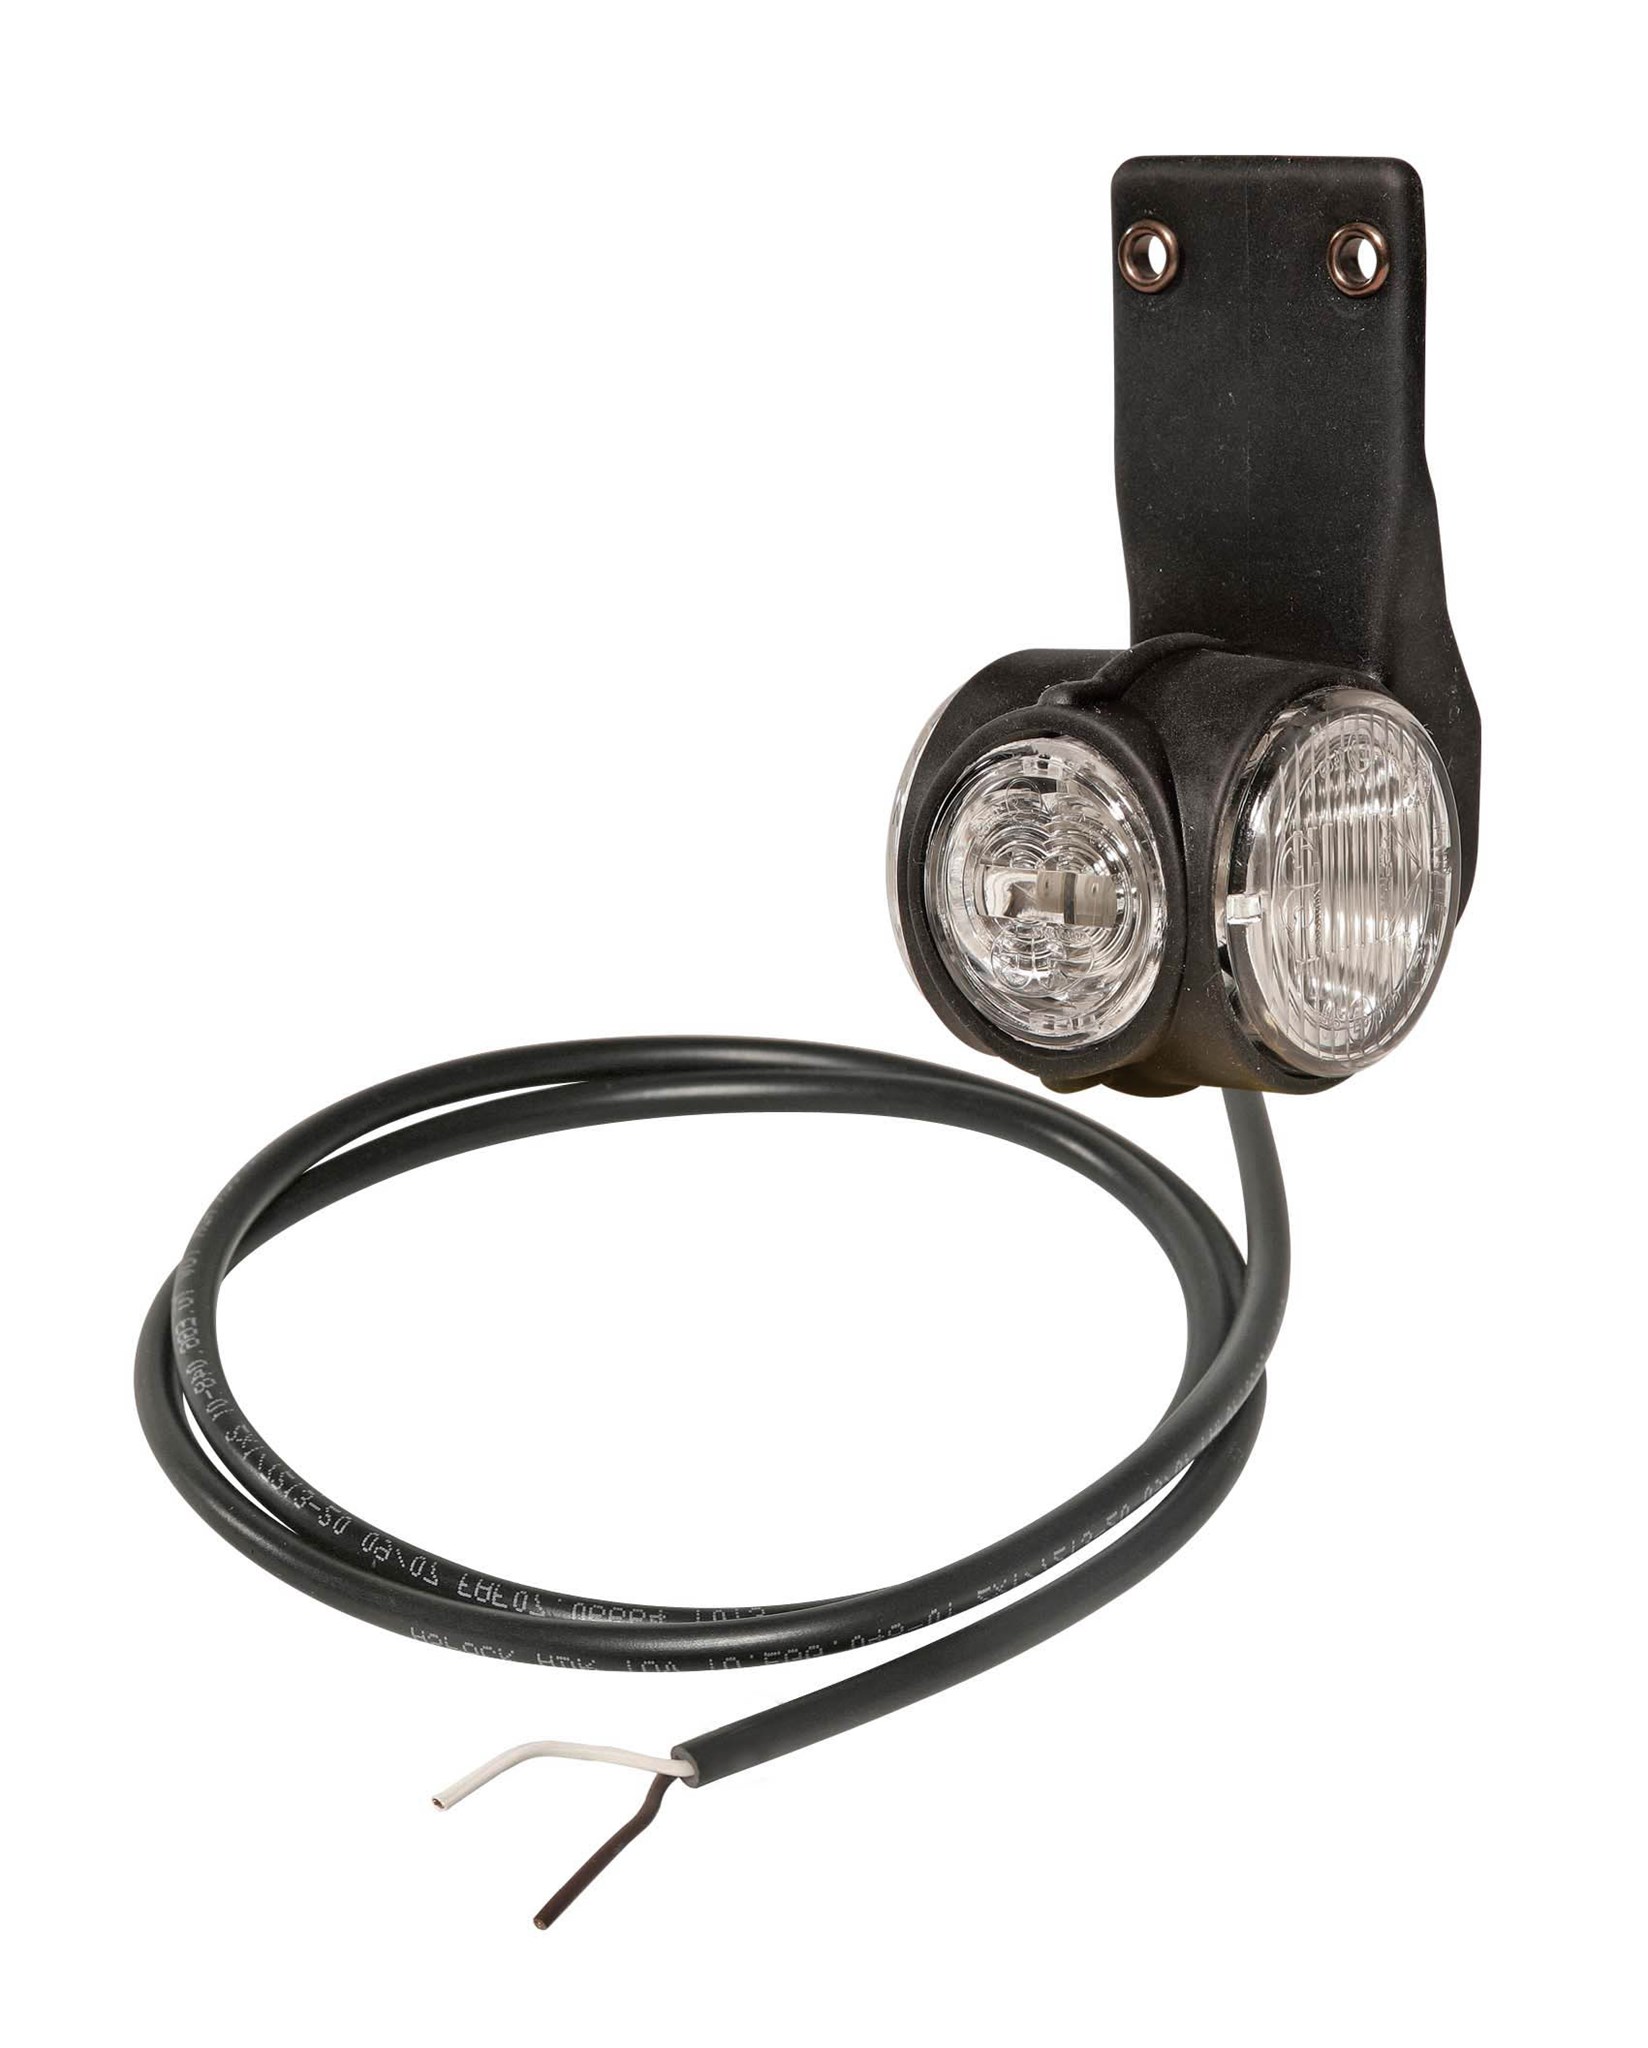 Immagine di 31-3366-027 Aspöck Superpoint III LED rechts off 4000mm r/w/o,ger Pendelhalter